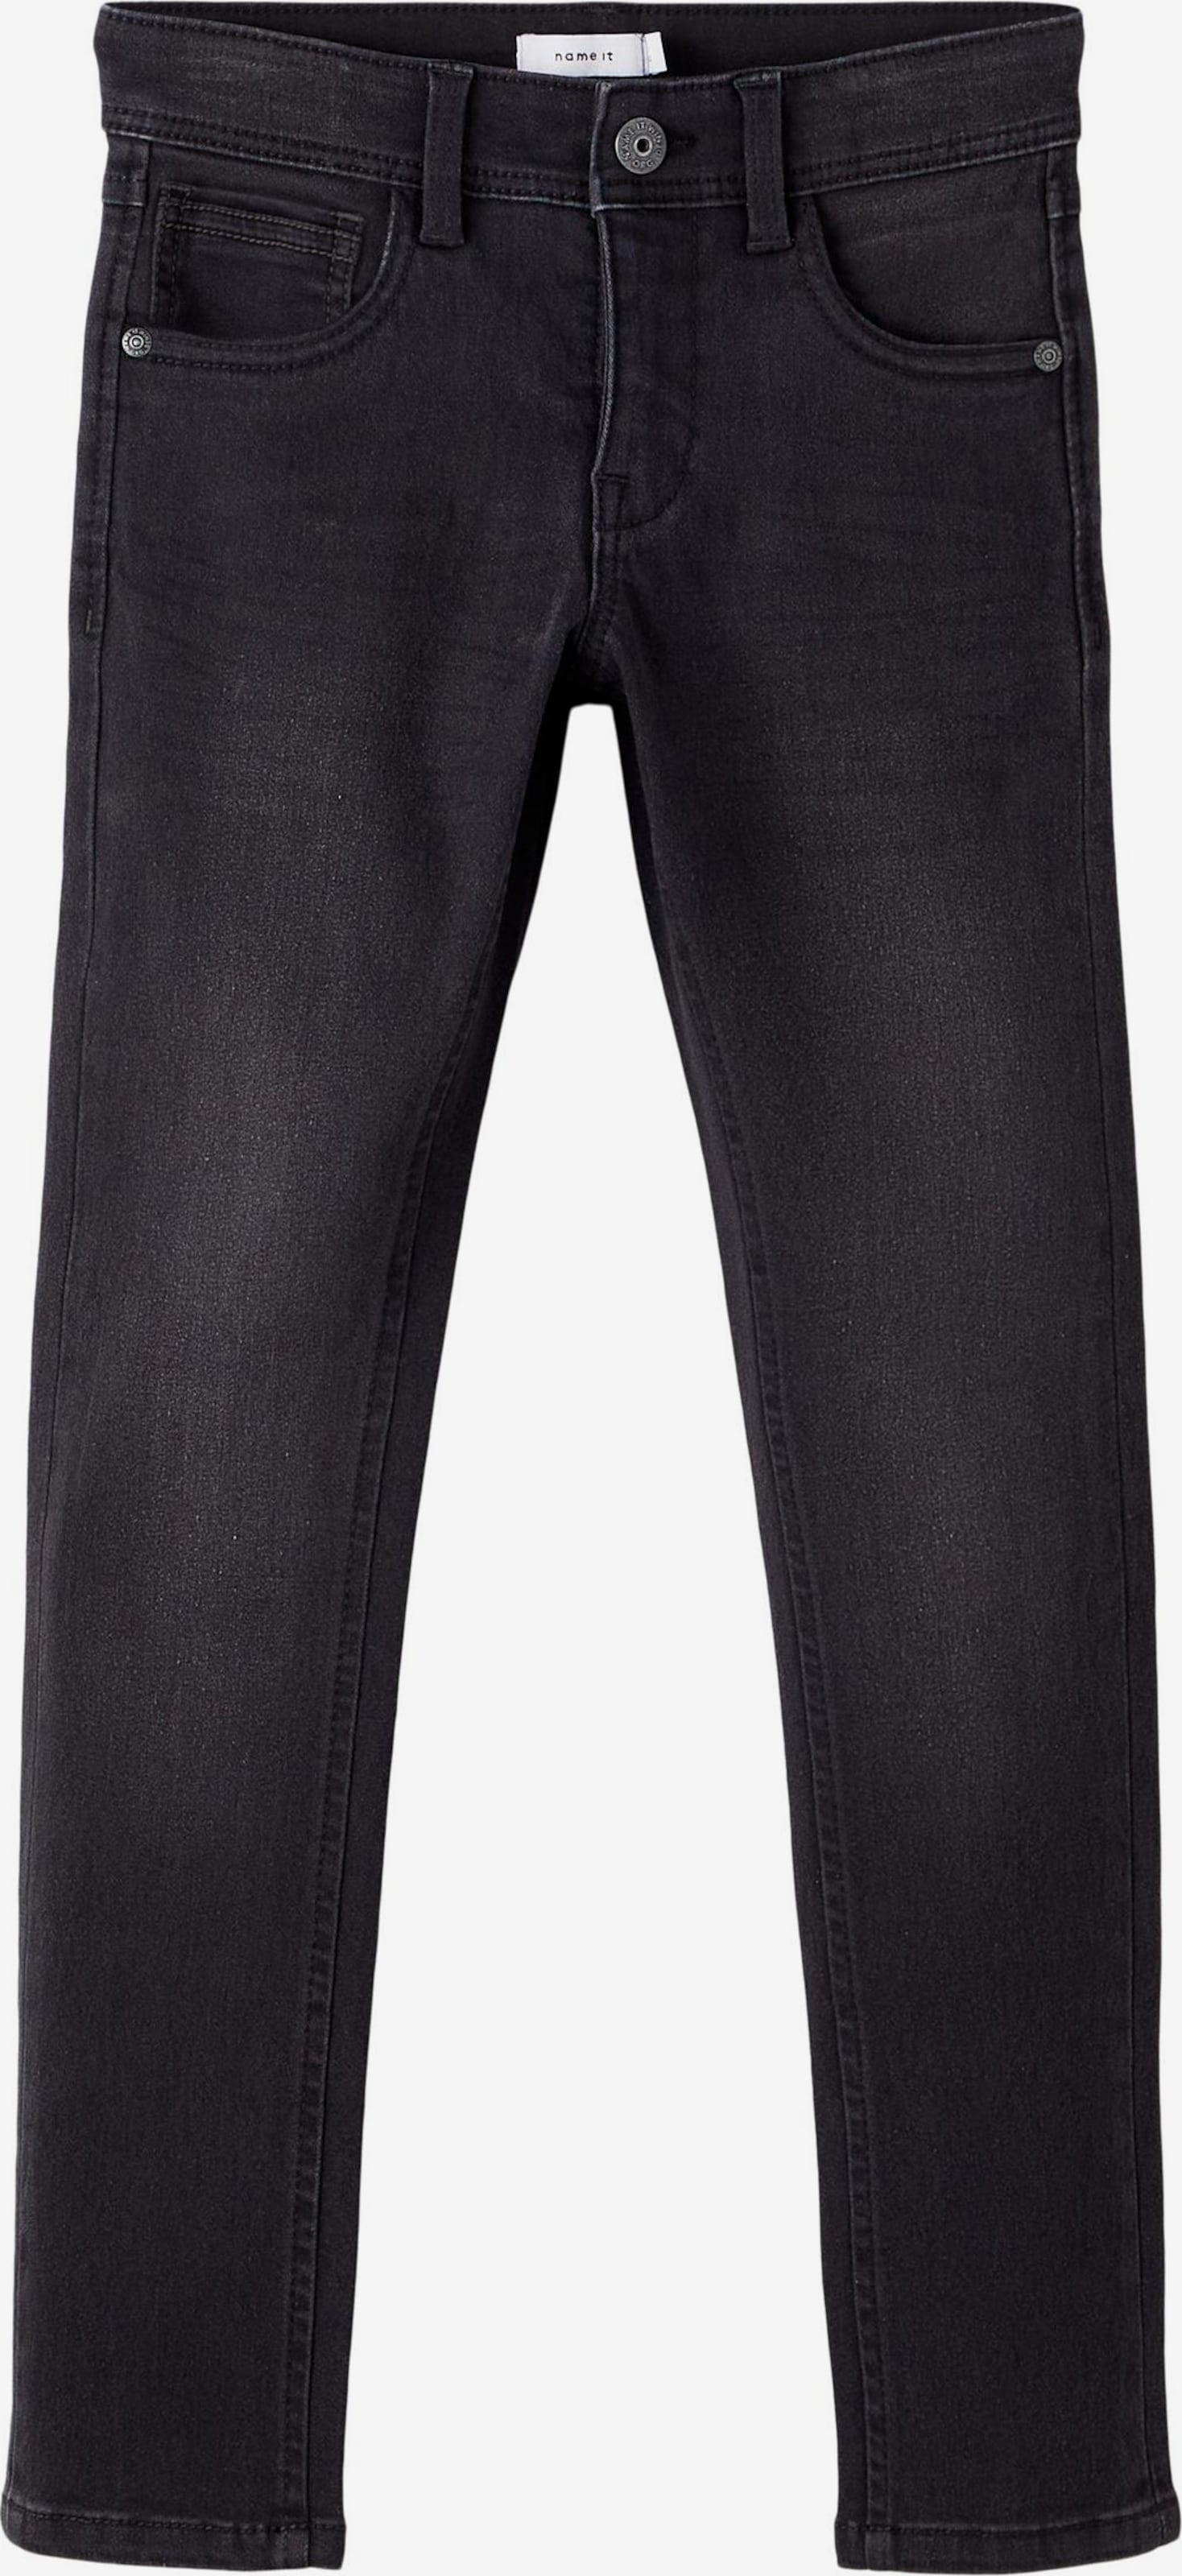 NAME IT Slim fit Jeans 'Robin' in Black | ABOUT YOU